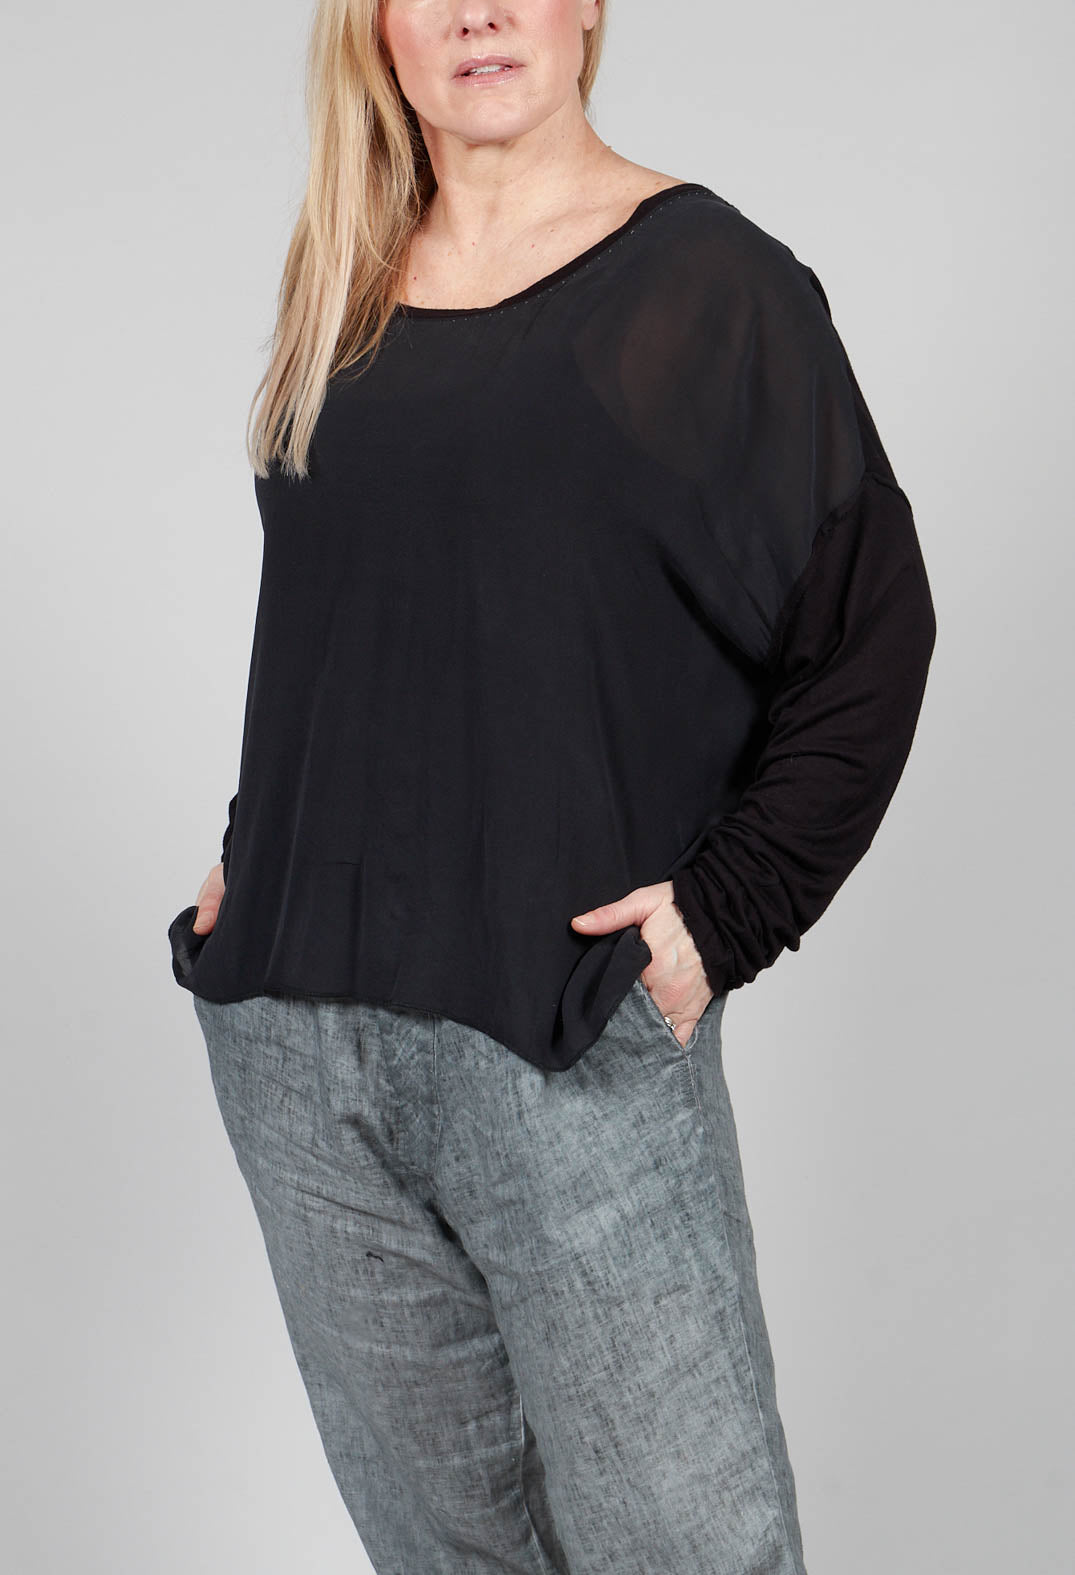 Lightweight Top with Contrasting Sleeves in Black